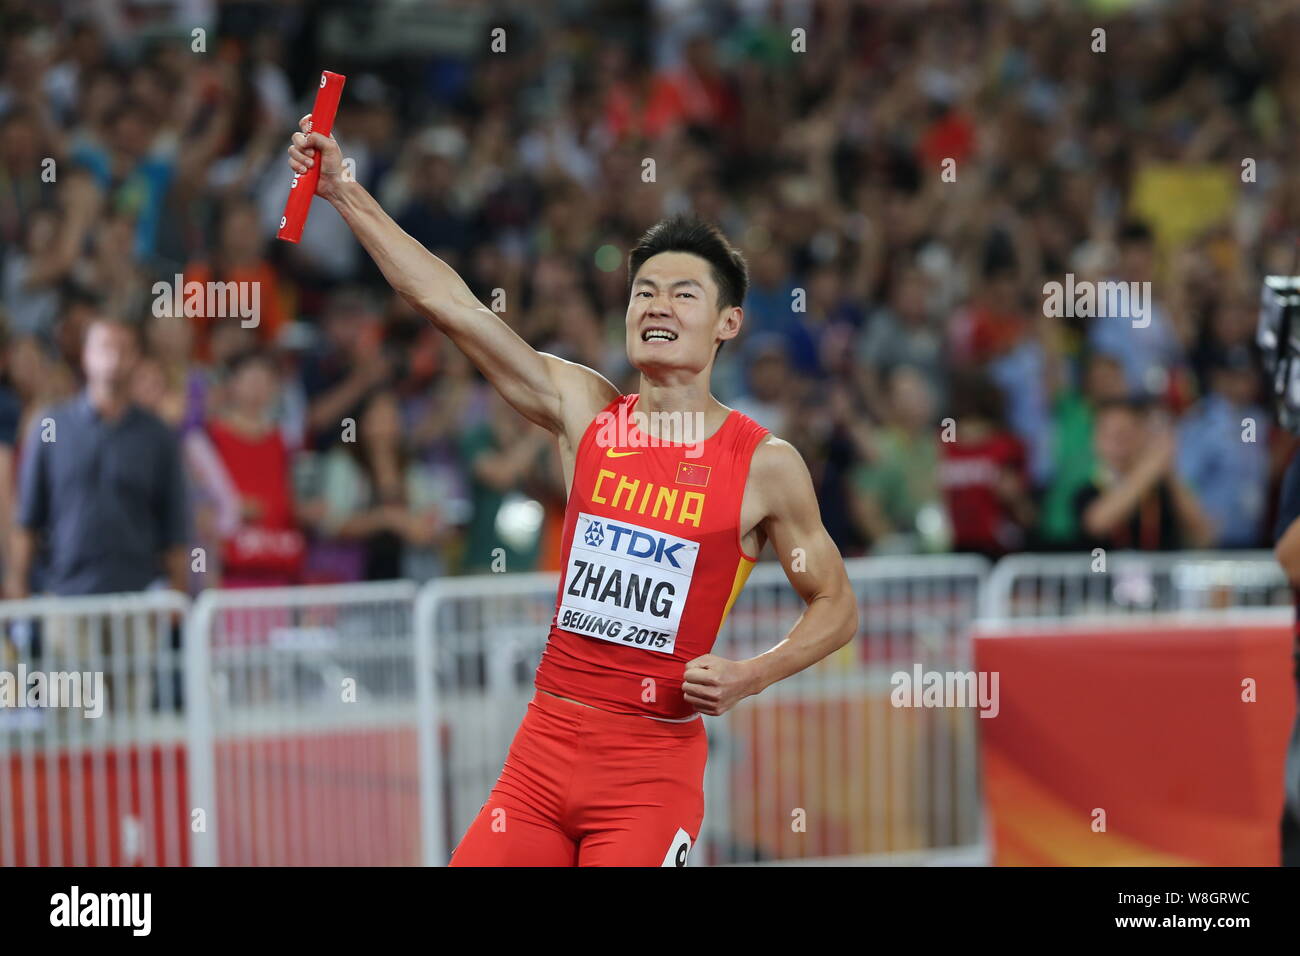 Zhang Peimeng of China's men's 4x100m relay team celebrates after winning the runner-up of the men's 4x100m relay final during the Beijing 2015 IAAF W Stock Photo